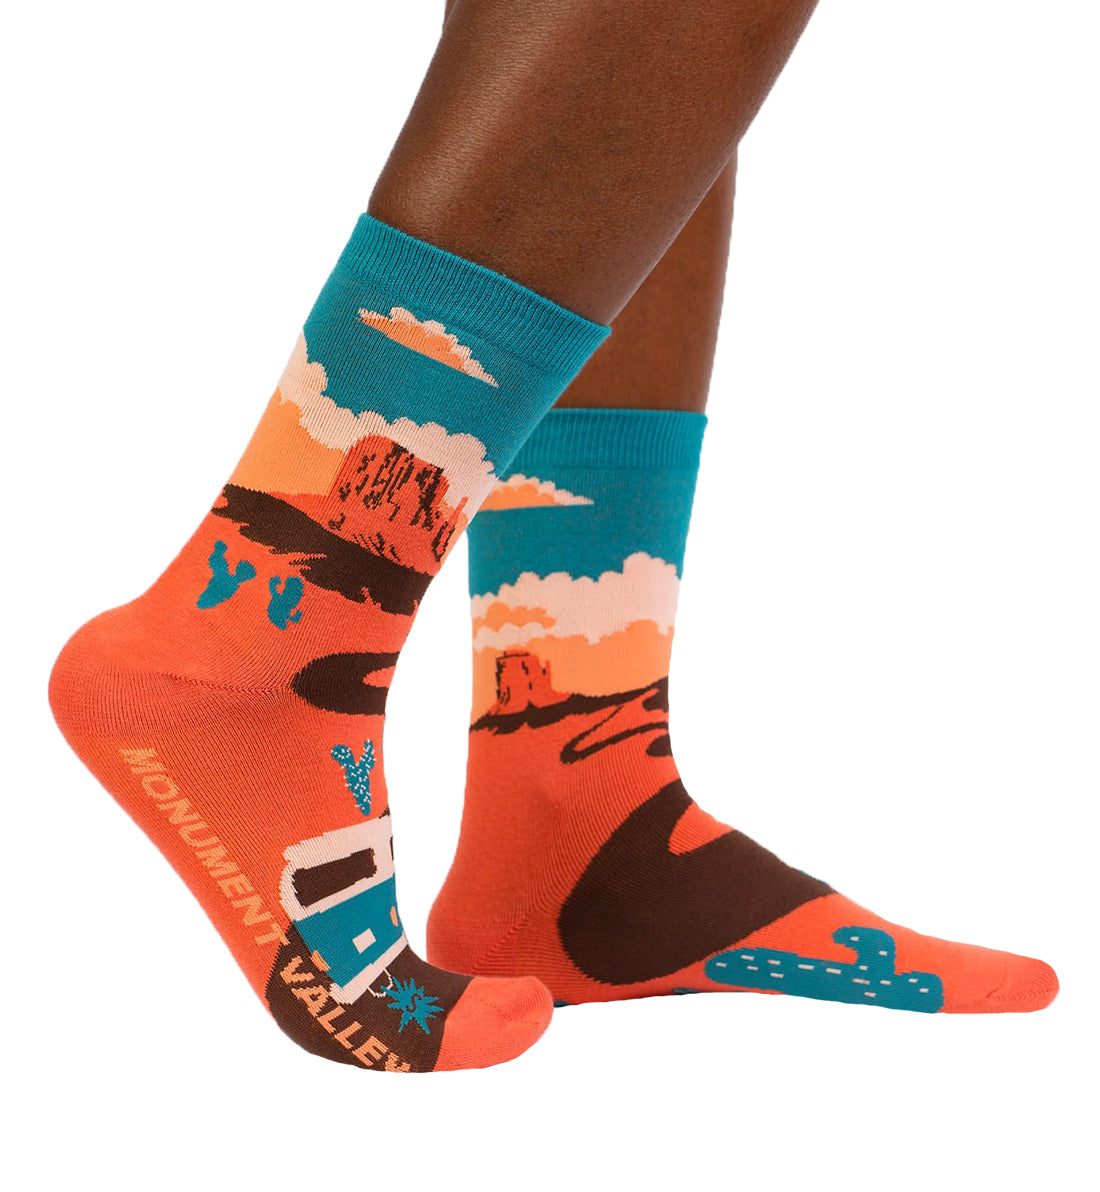 SOCK it to me Women's Crew Socks (w0258)- Monument Valley - Monument Valley,One Size